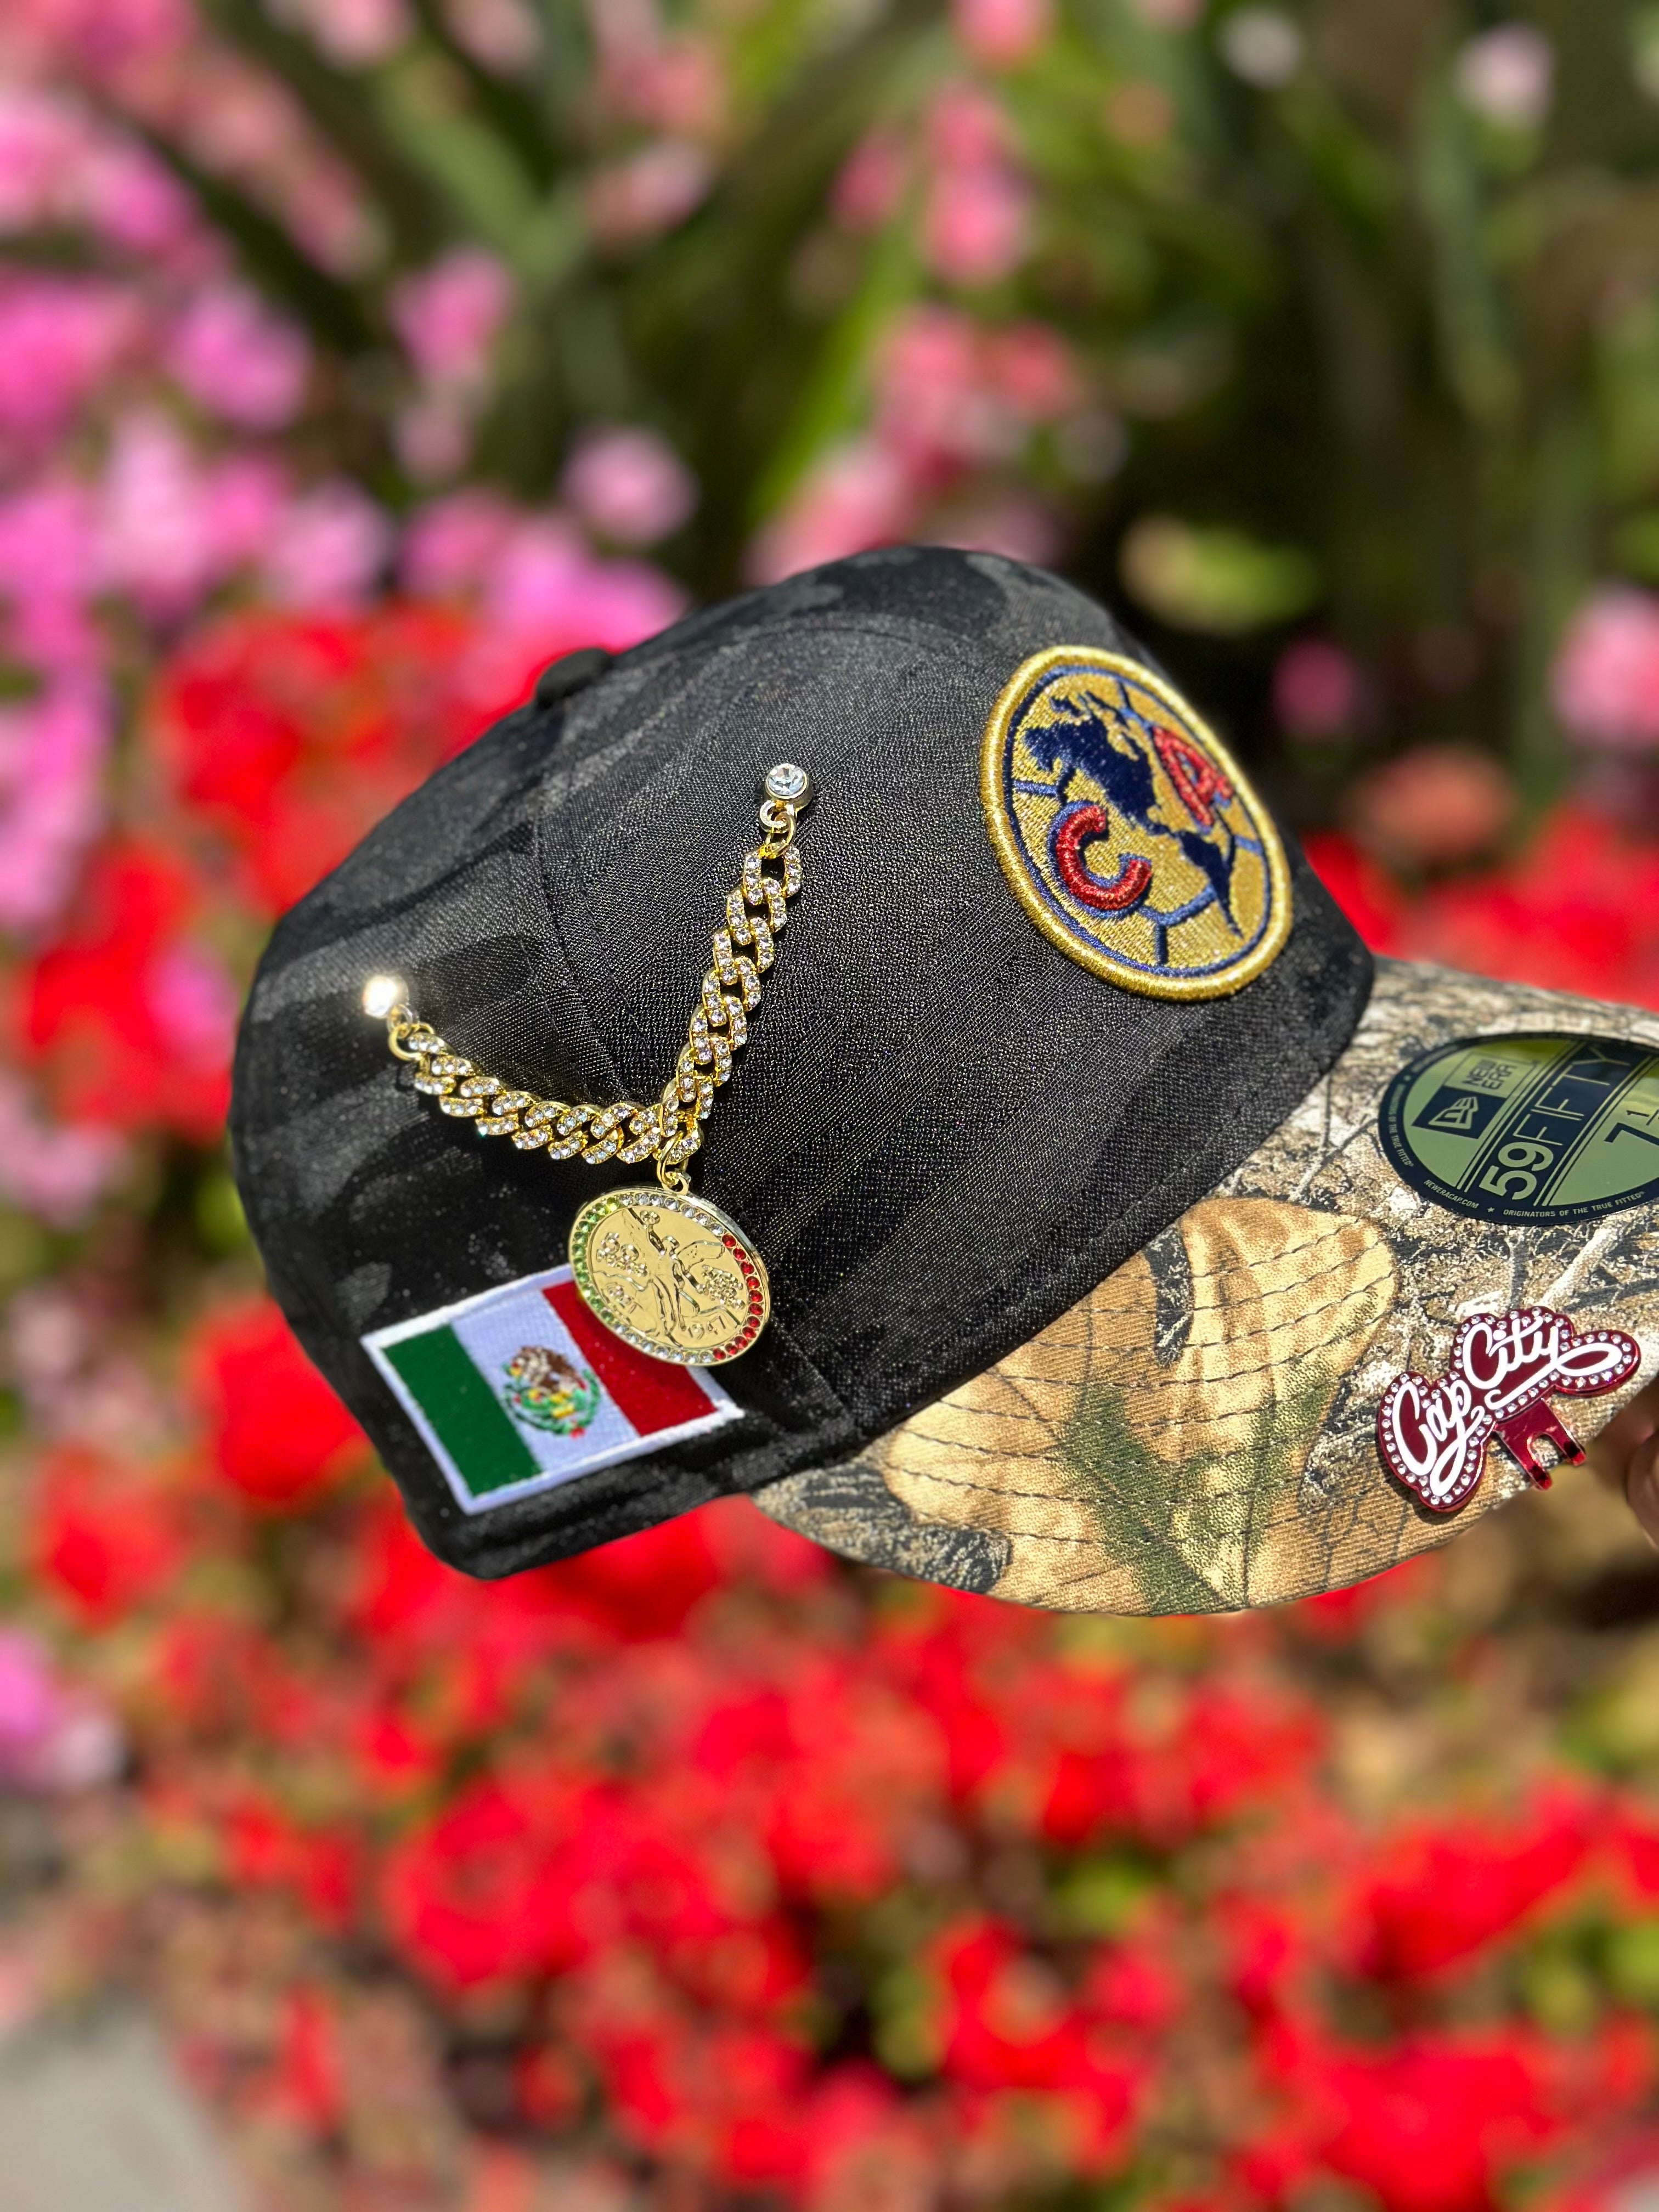 NEW ERA EXCLUSIVE 59FIFTY BLACK CAMO/REALTREE "CLUB AMERICA" W/ MEXICO FLAG SIDE PATCH